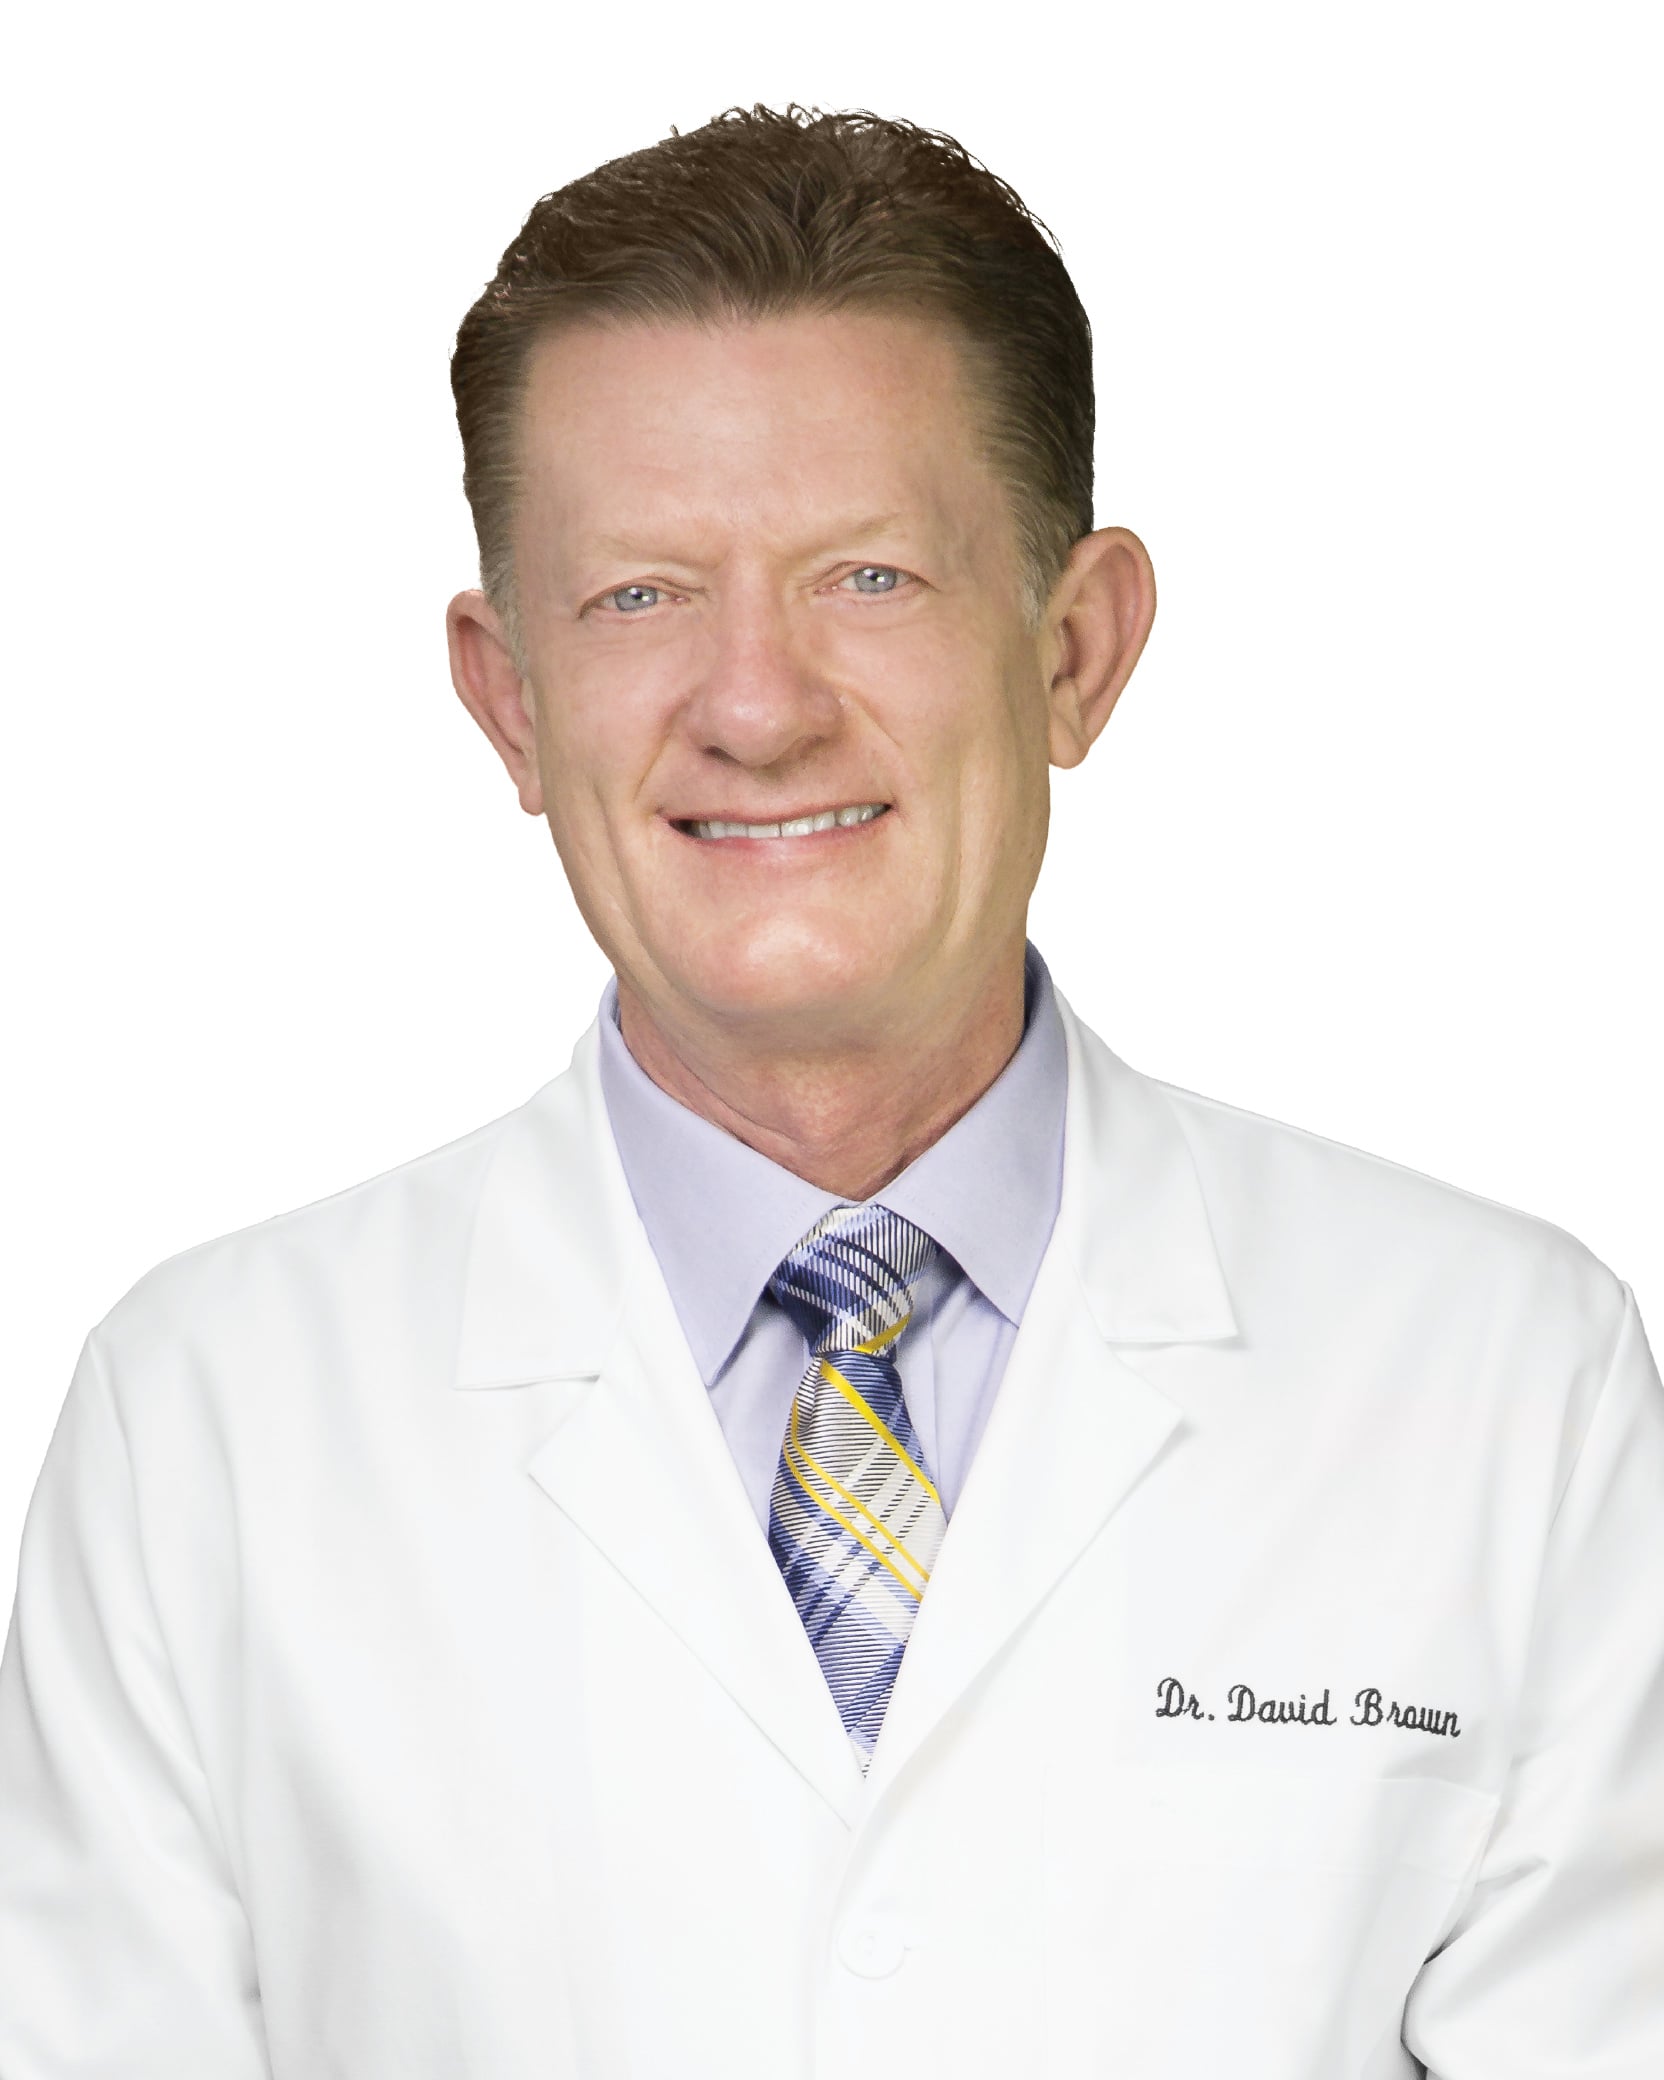 Dr. David Nelson Brown MD